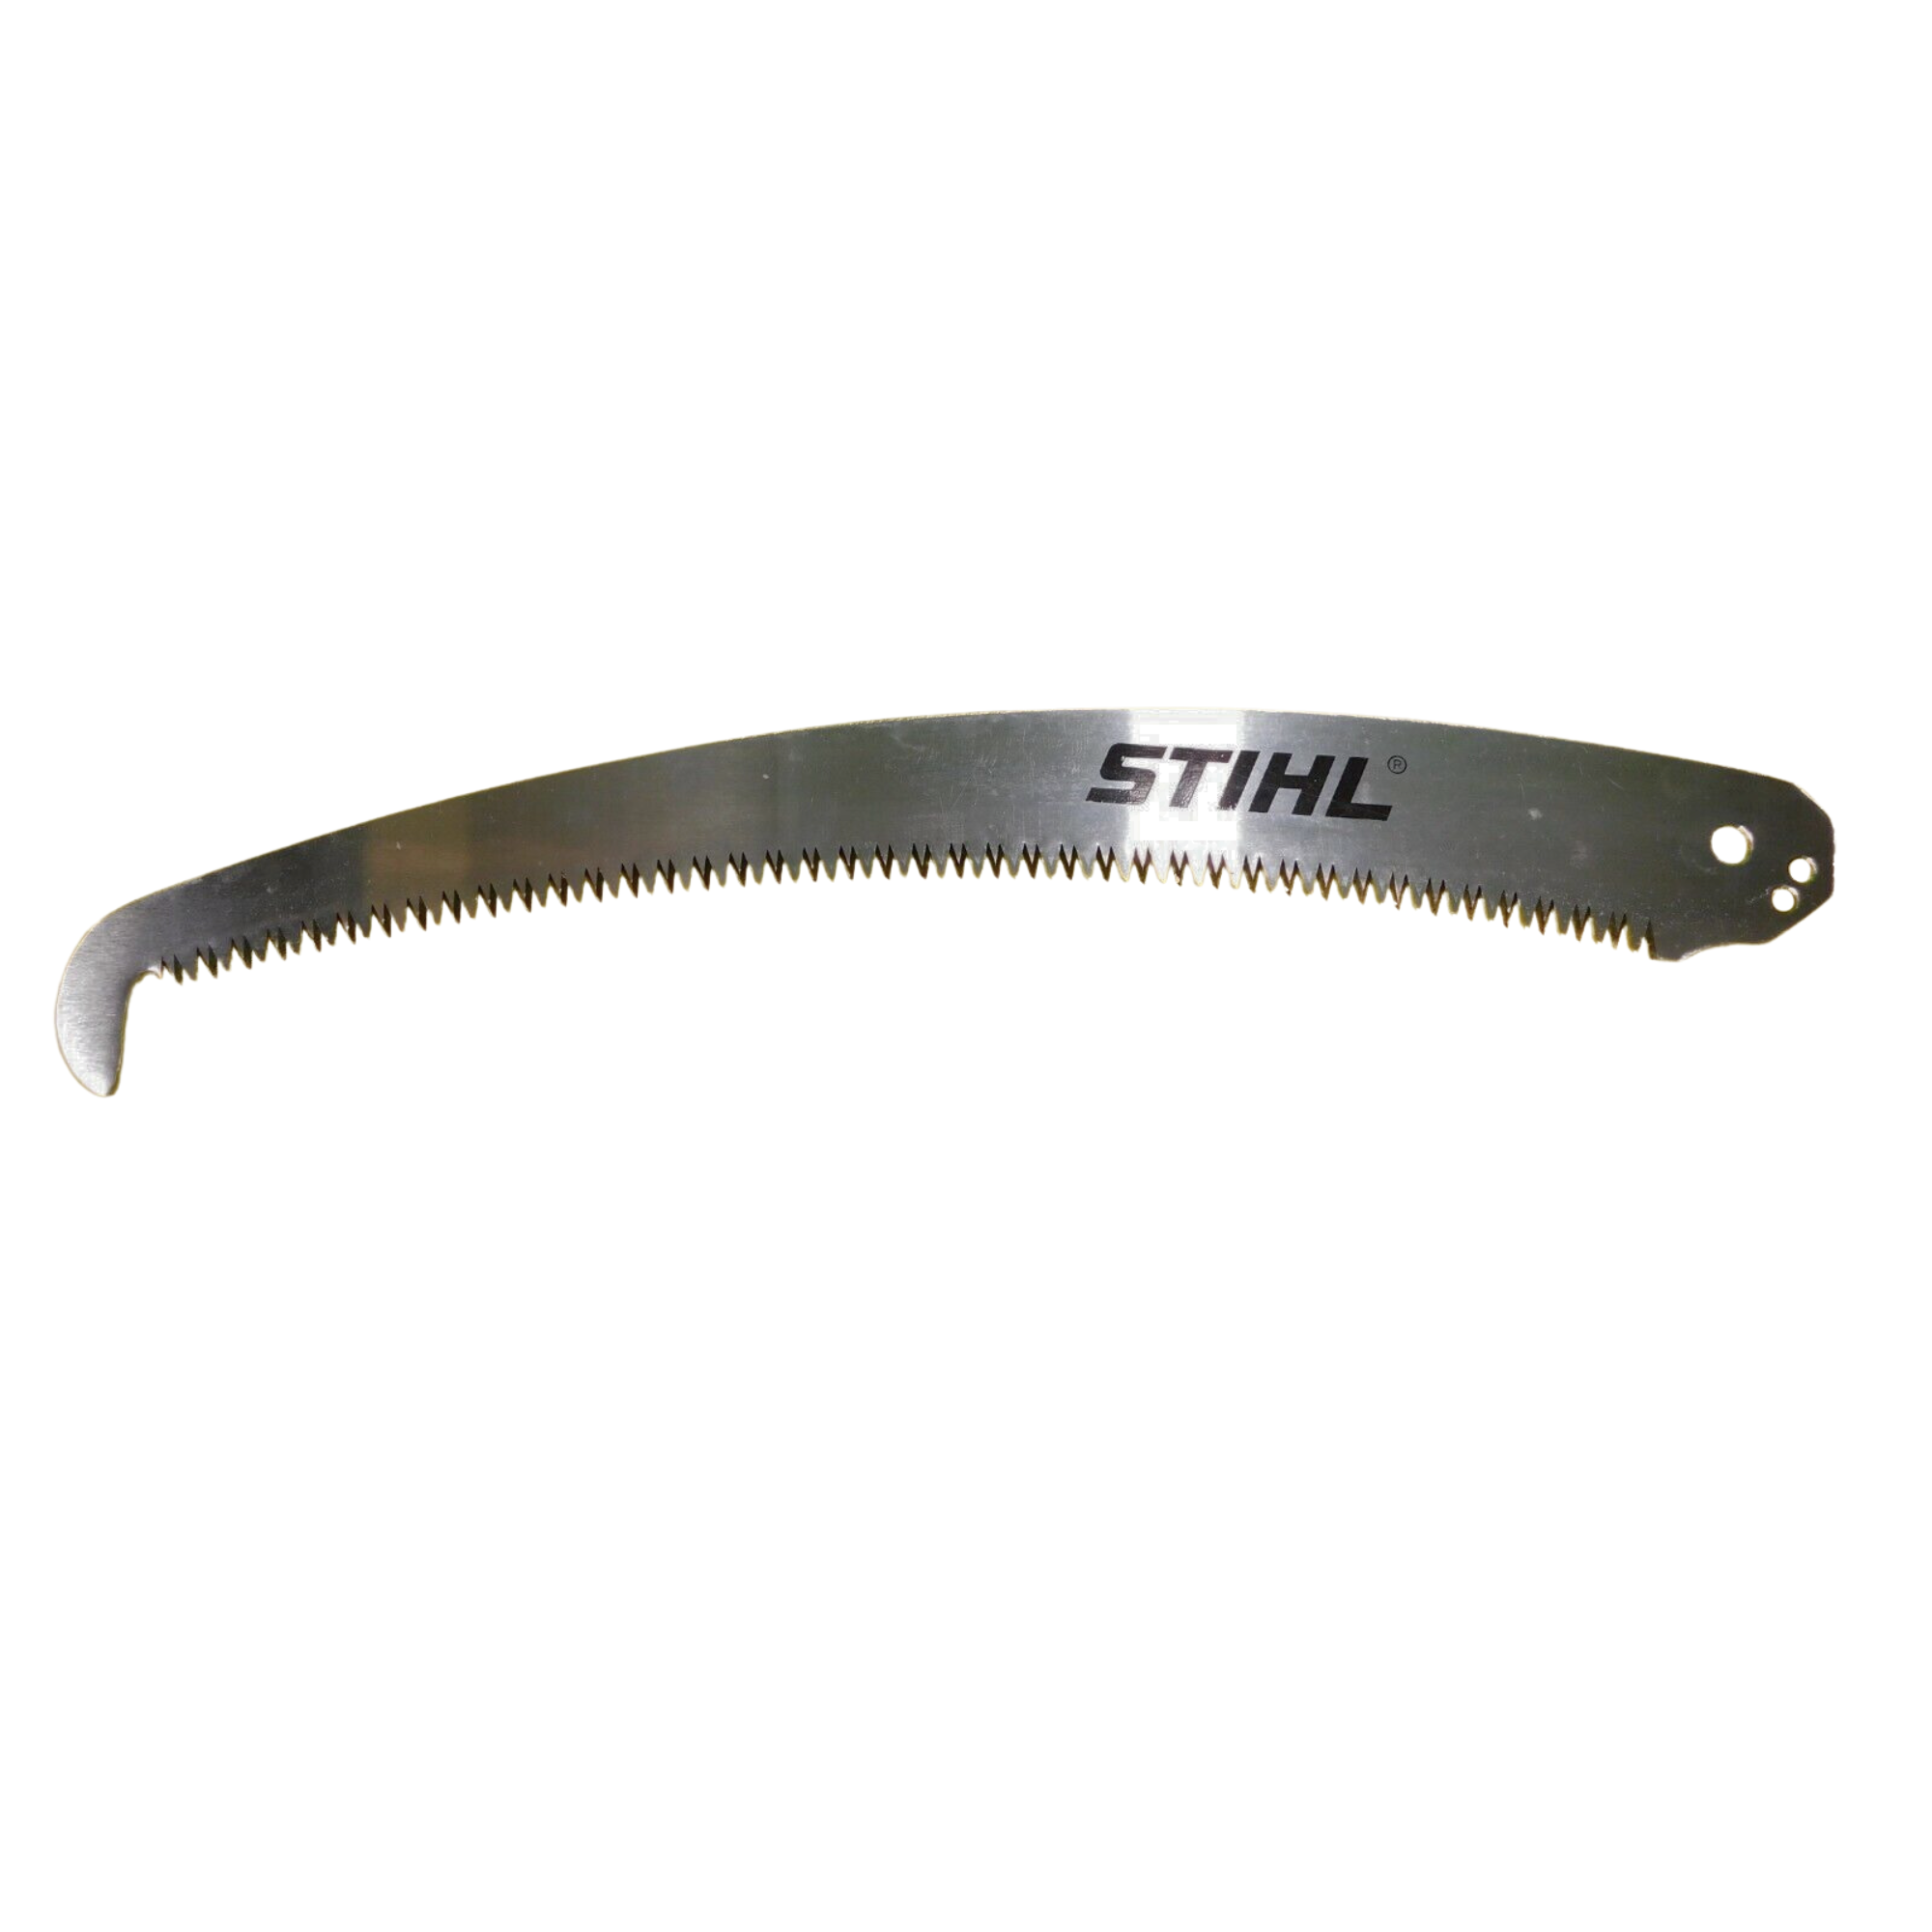 STIHL Replacement Saw Blade for PP 900 | 7010 881 9000